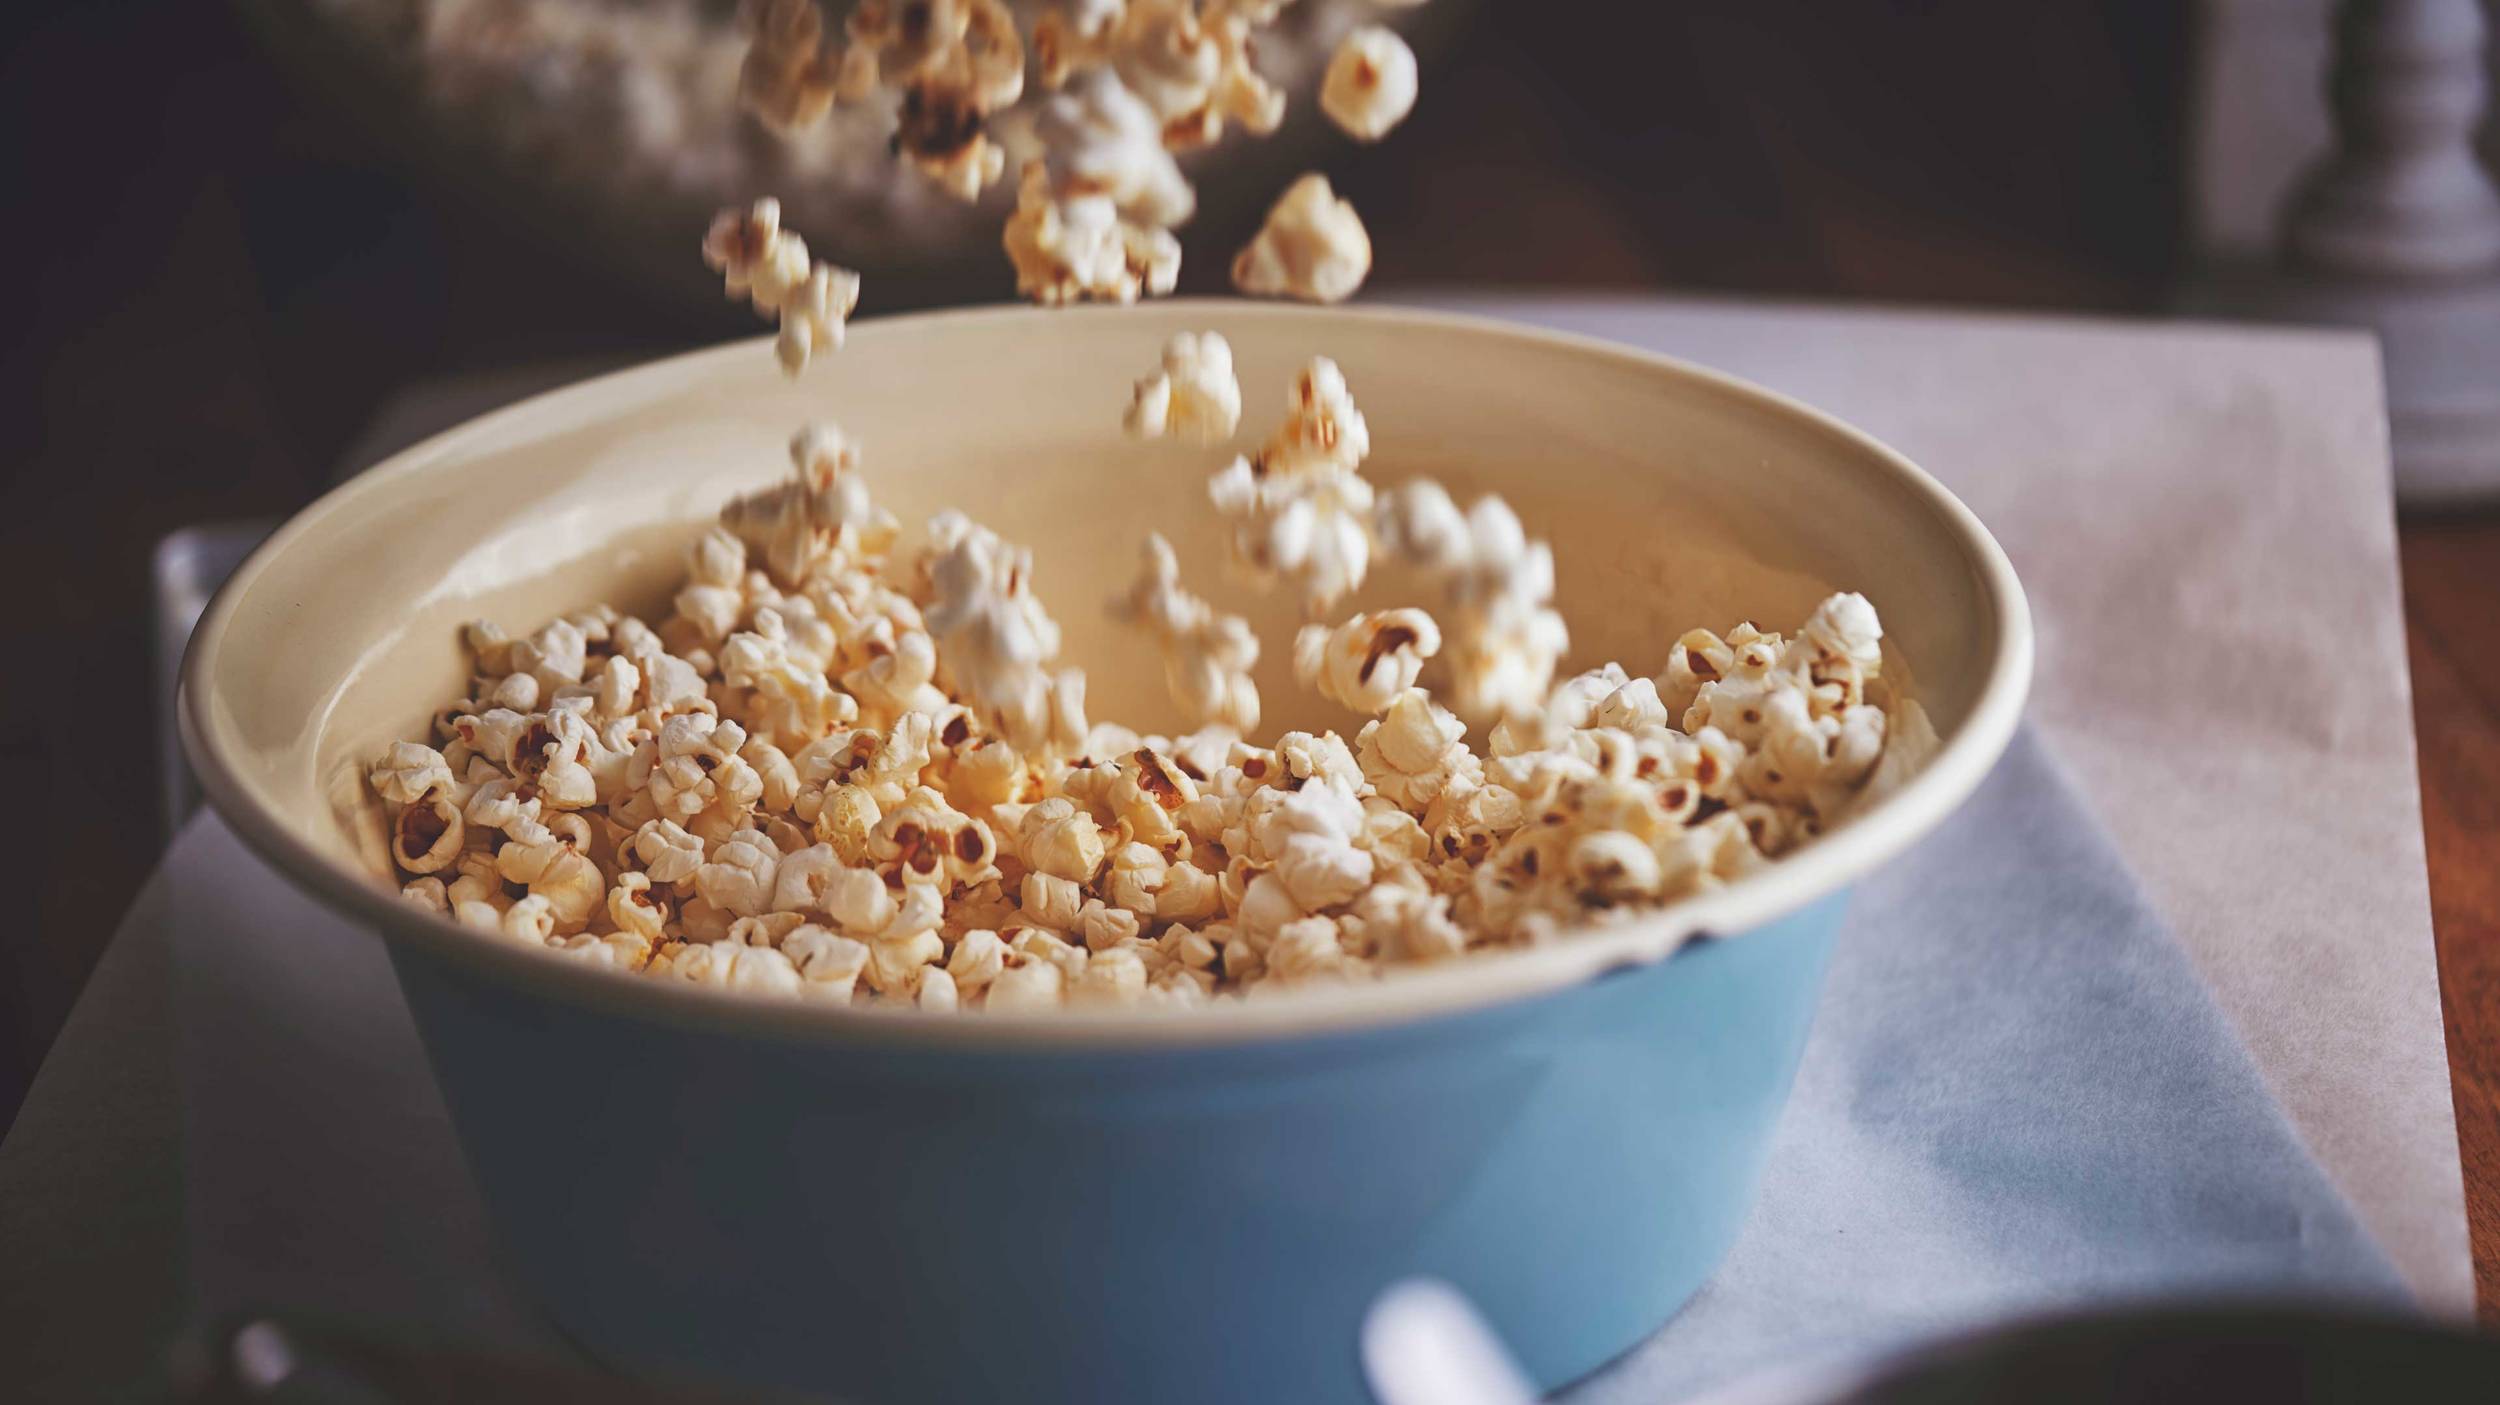 Popcorn is one of the world’s most popular snack foods and has been enjoyed across the globe for thousands of years.